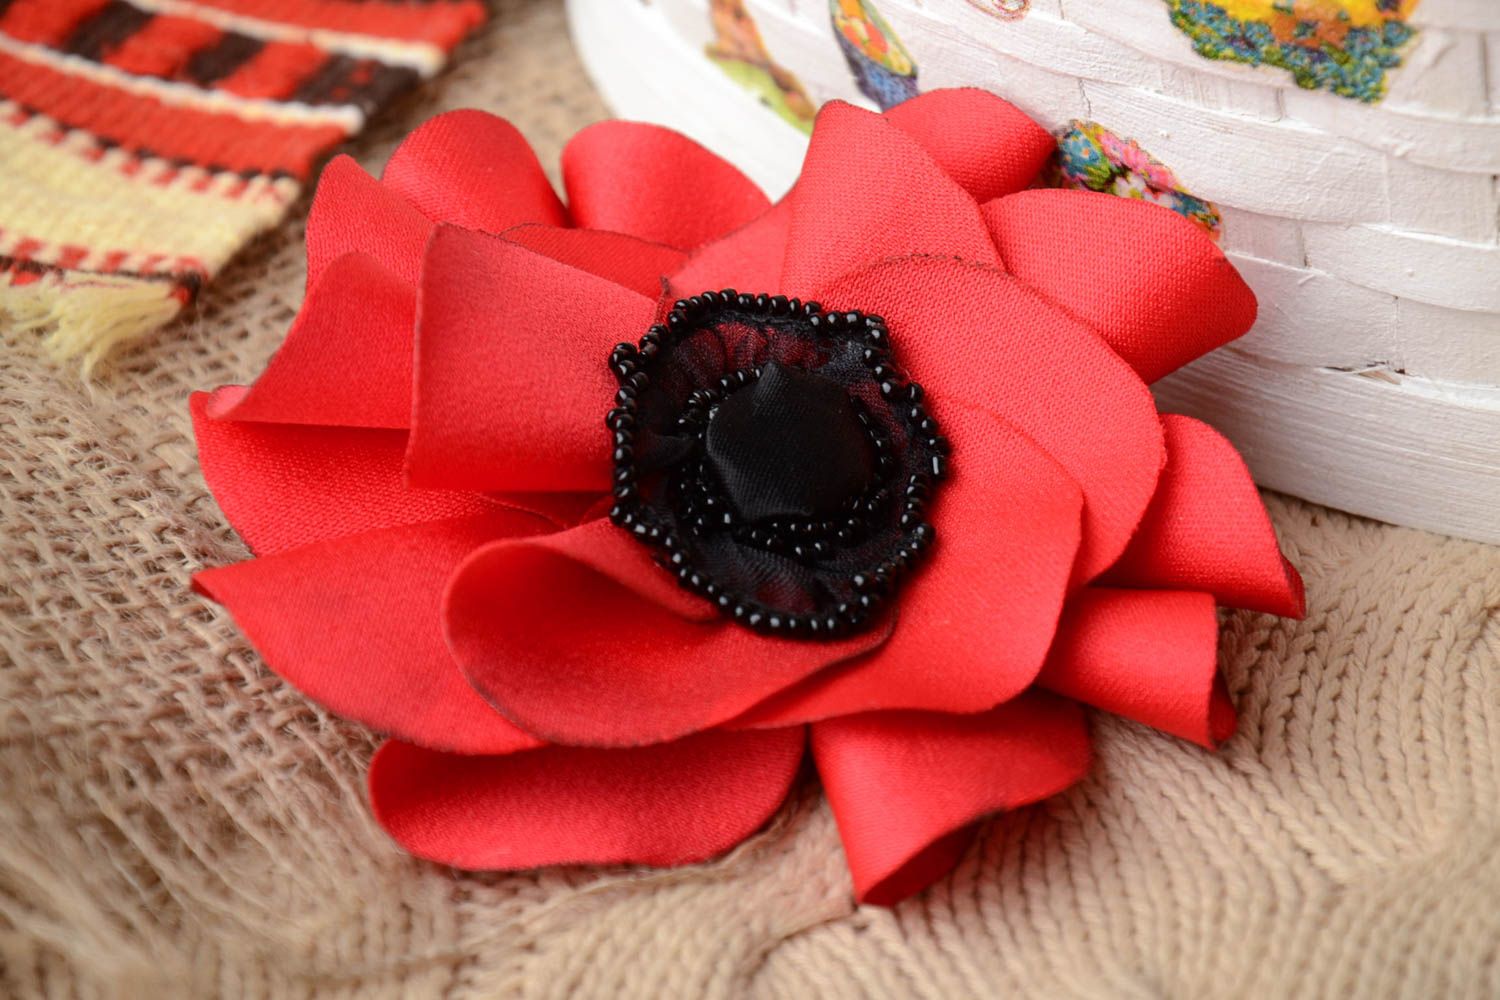 Large textile brooch made of satin and chiffon red poppy handmade accessory photo 1